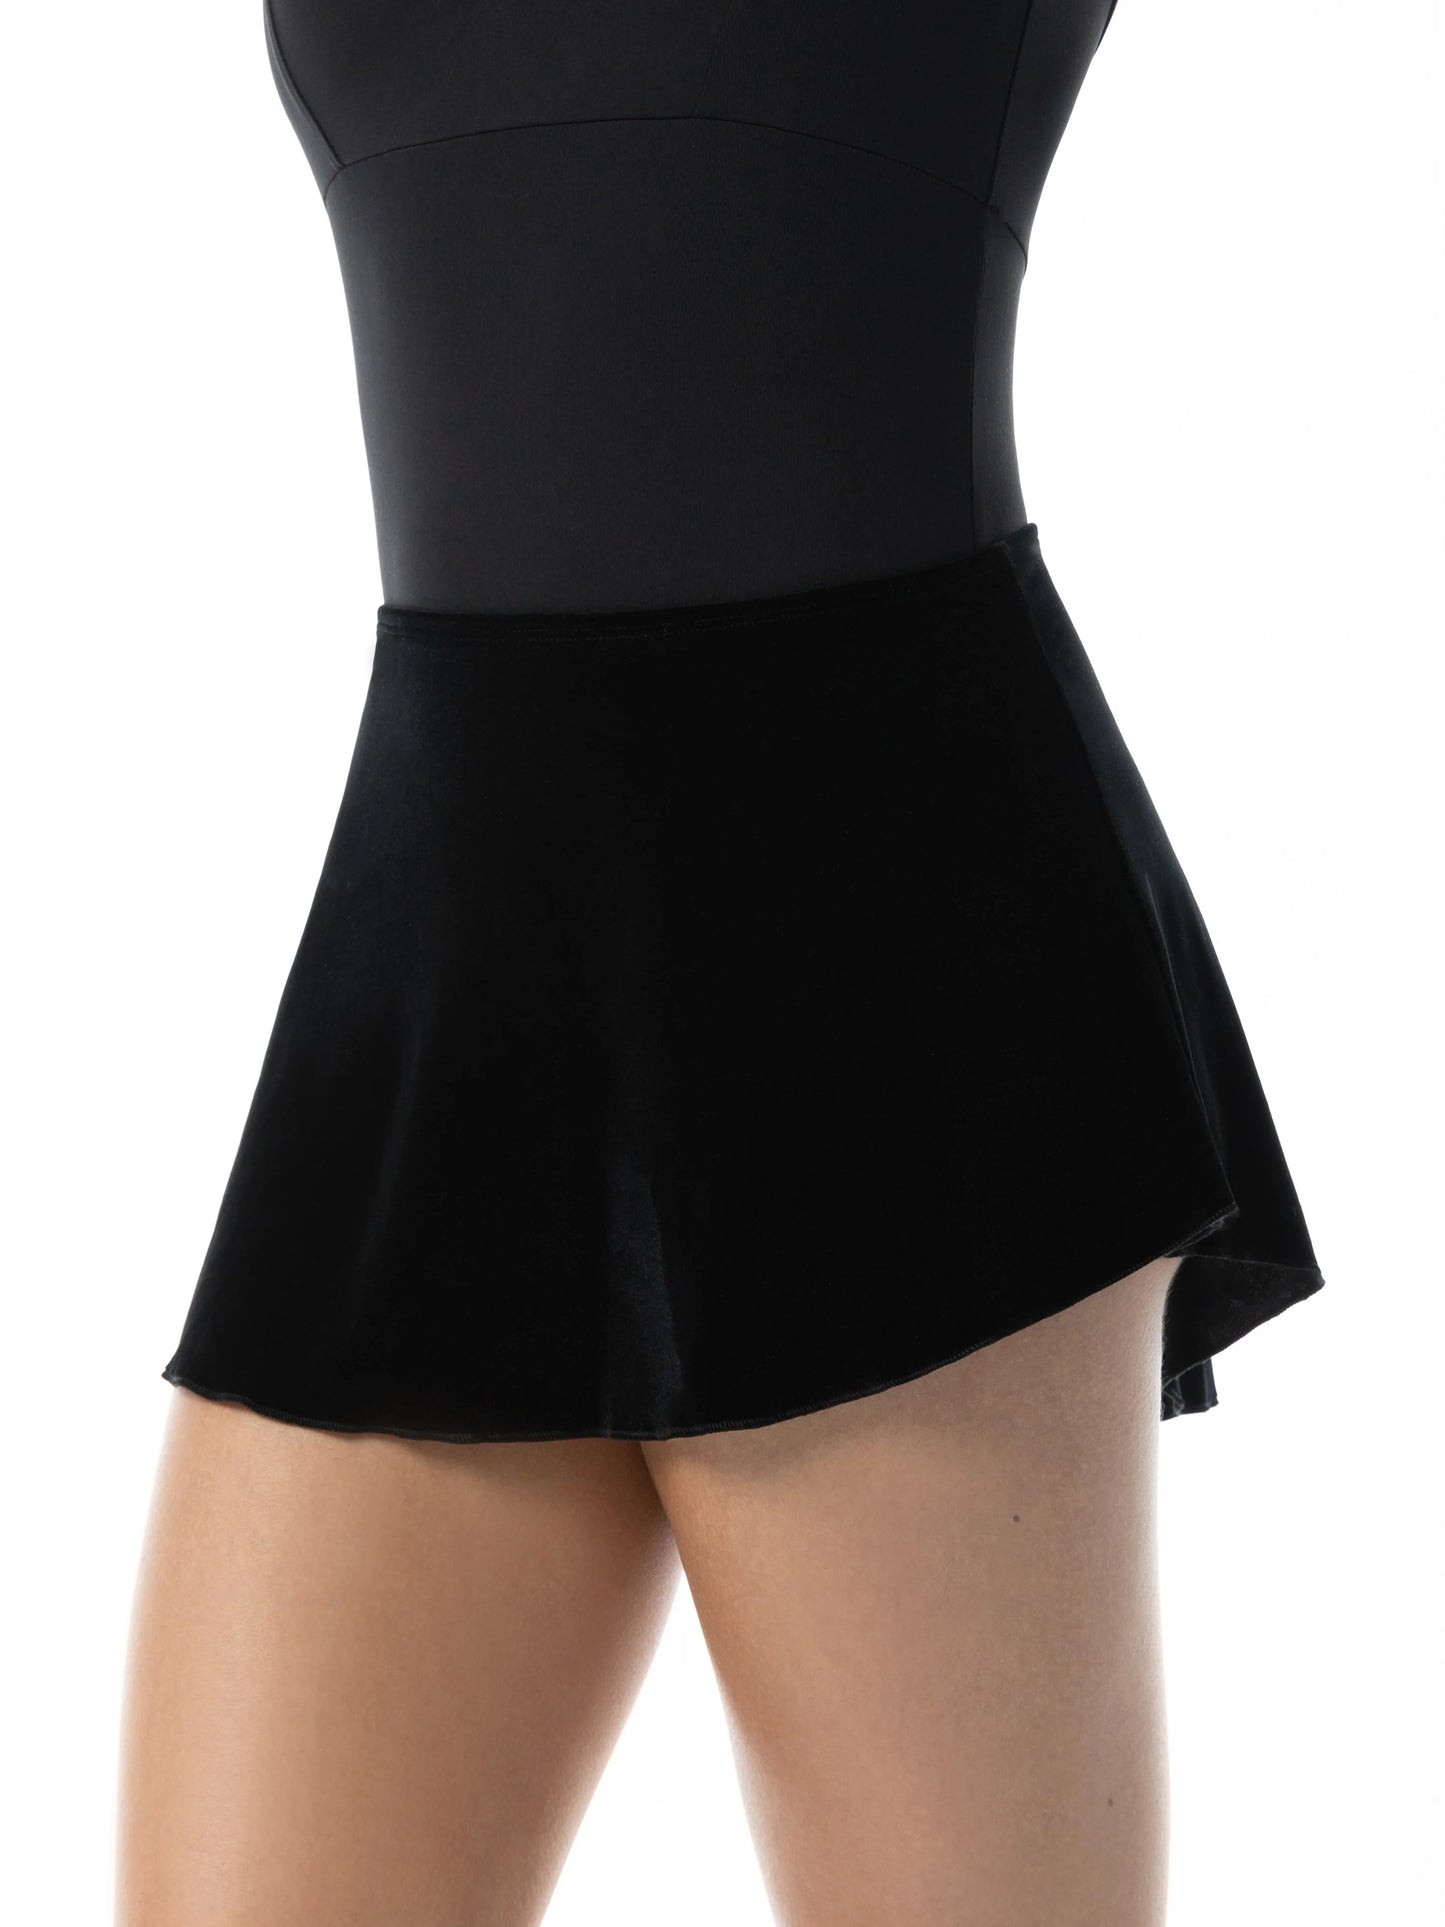 Stardust Pull-on High Low Adult Skirt (1009A)